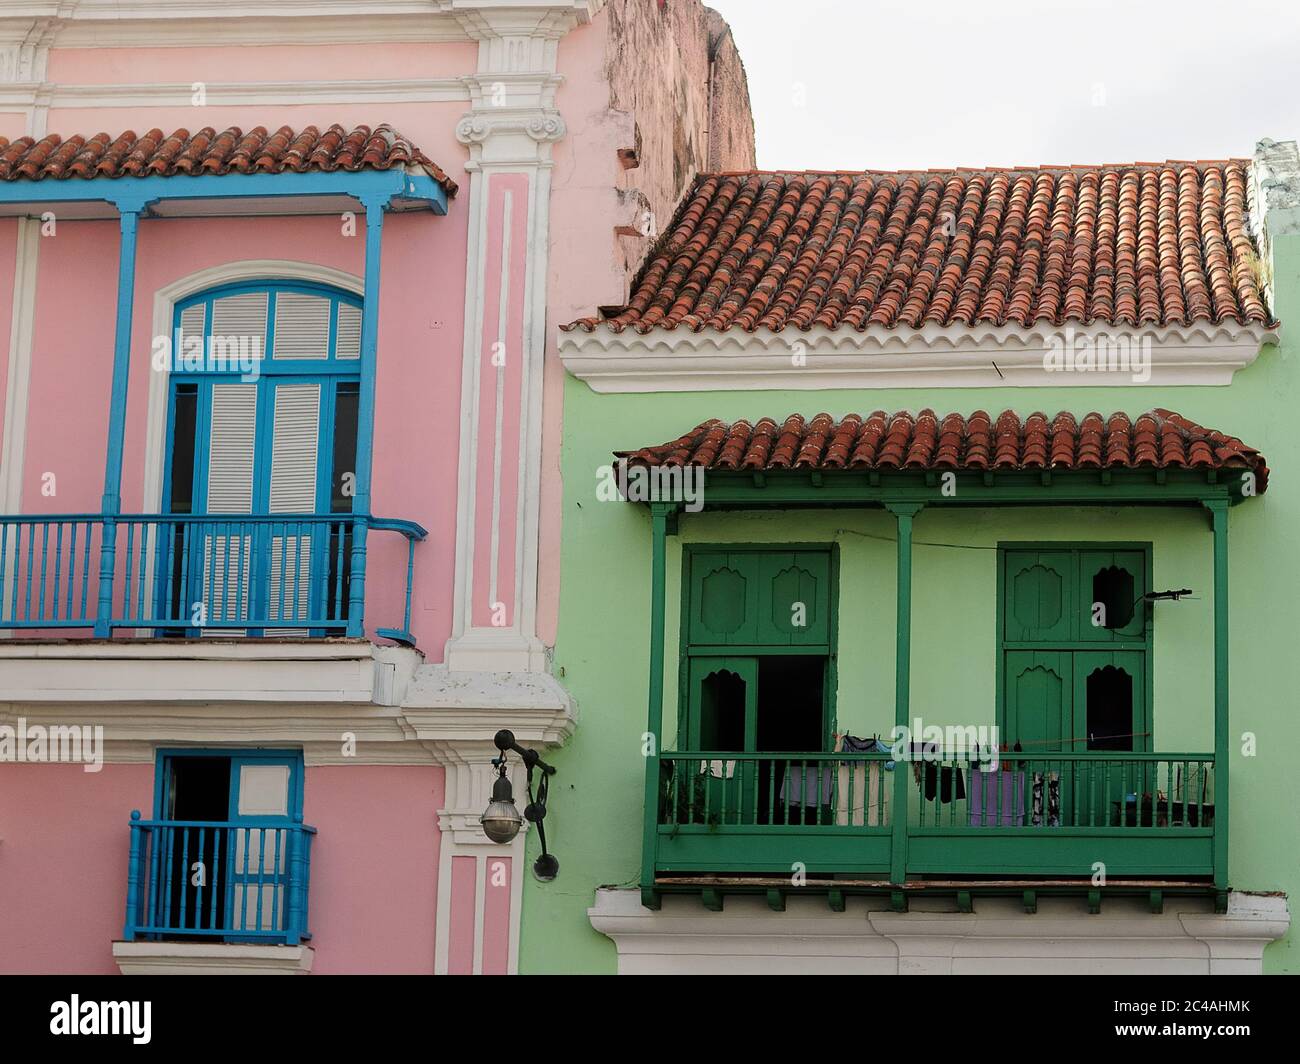 Old Havana colonial buildings development with blue and green balconies Stock Photo